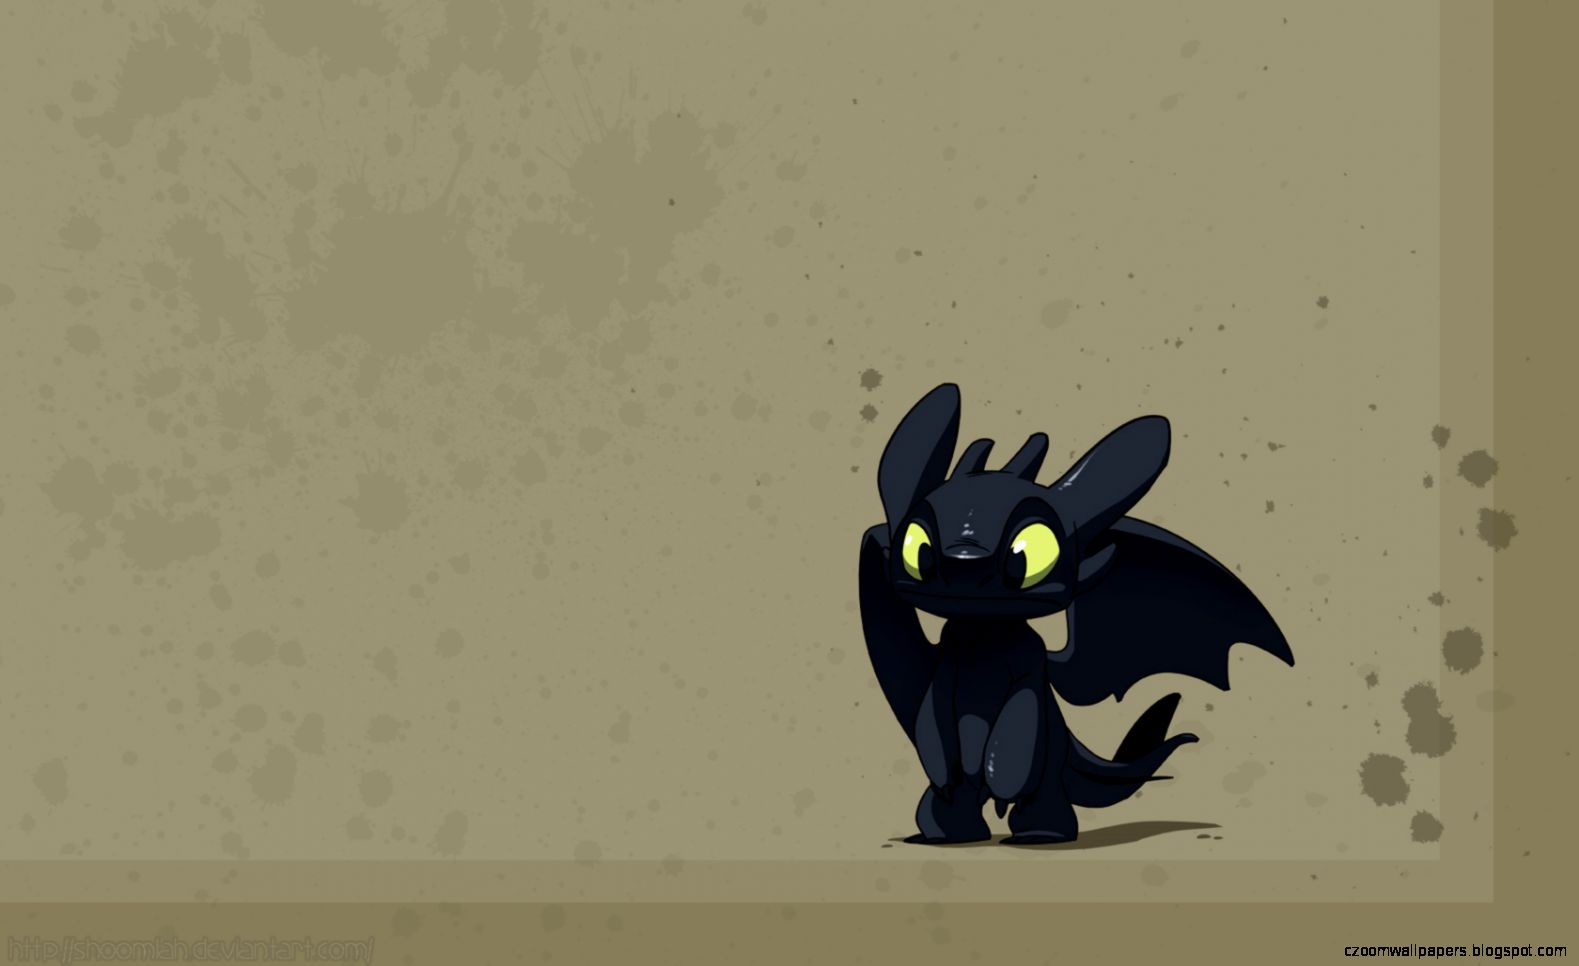 How To Train Your Dragon - Toothless Dragon Wallpaper Hd Cute - 1579x966  Wallpaper 